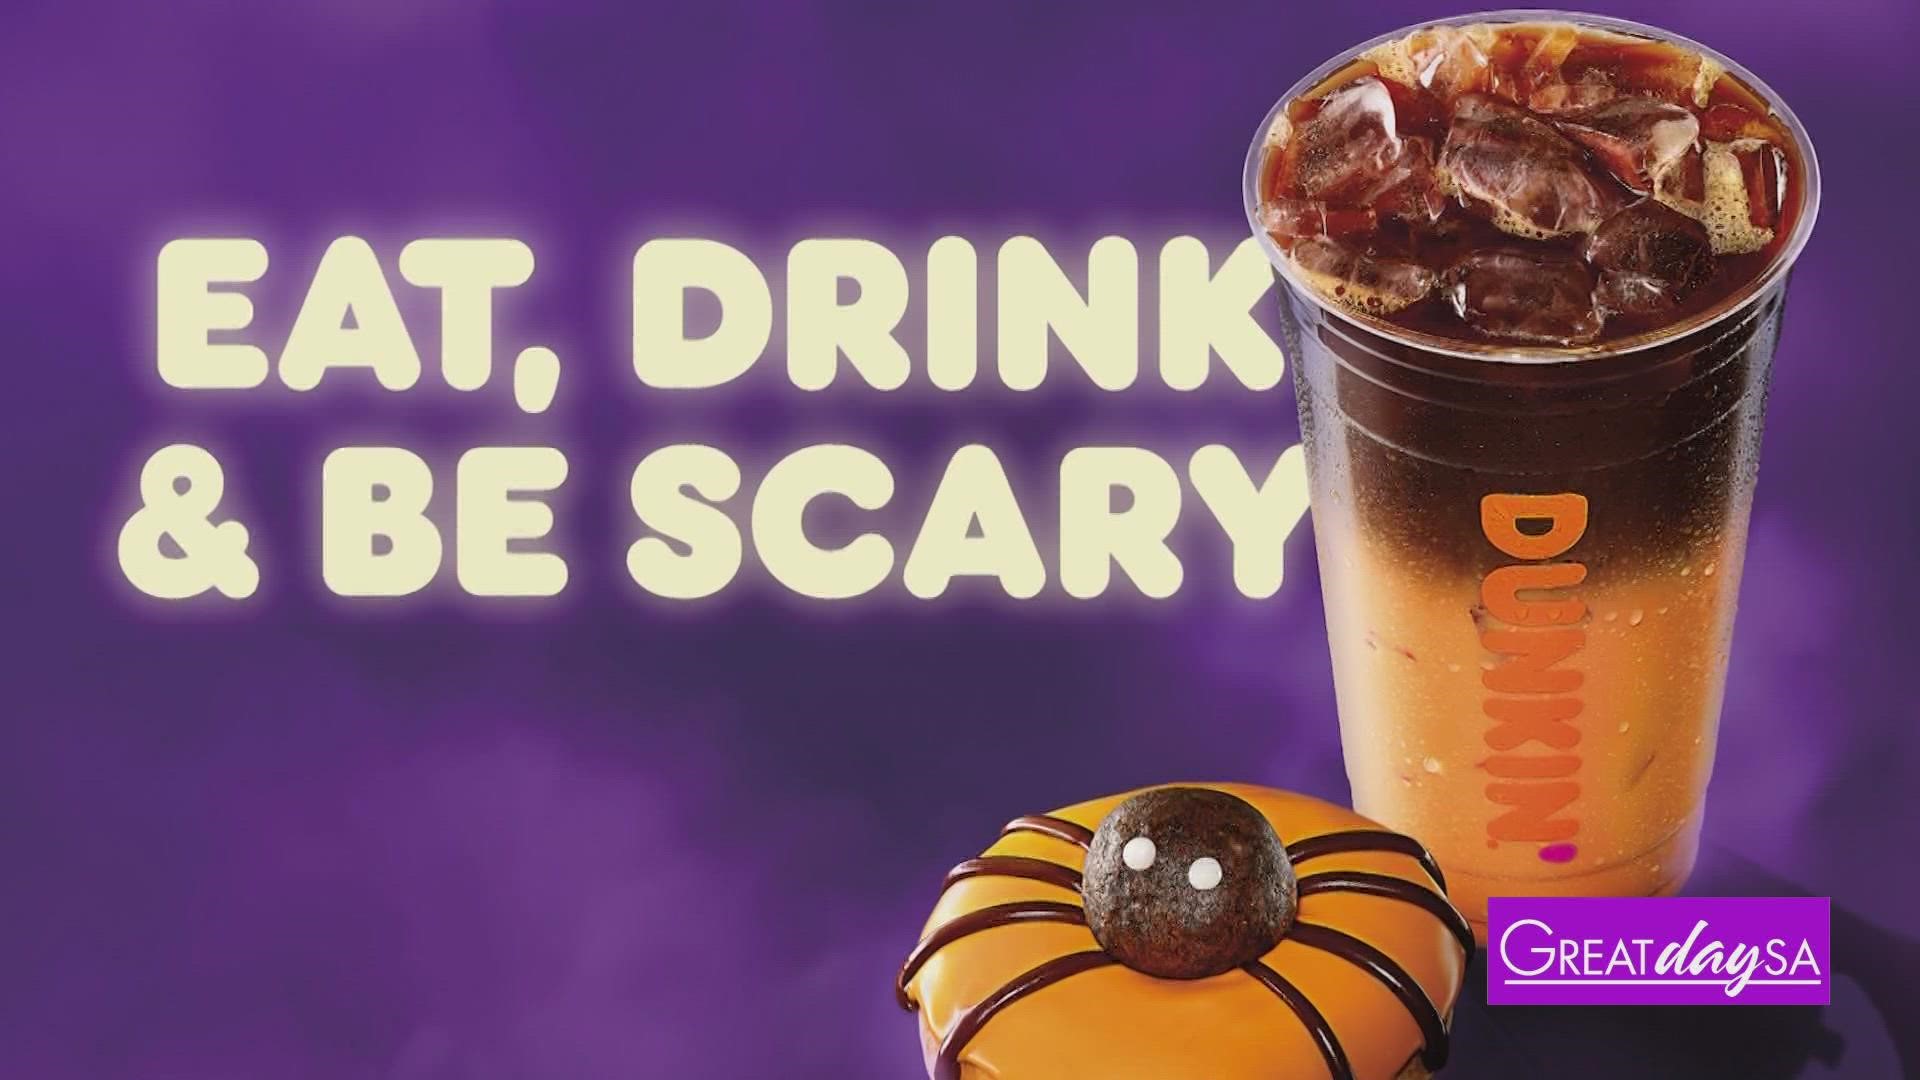 Some new Halloween flavors are too spooky for Clarke and Roma to try! Would you?